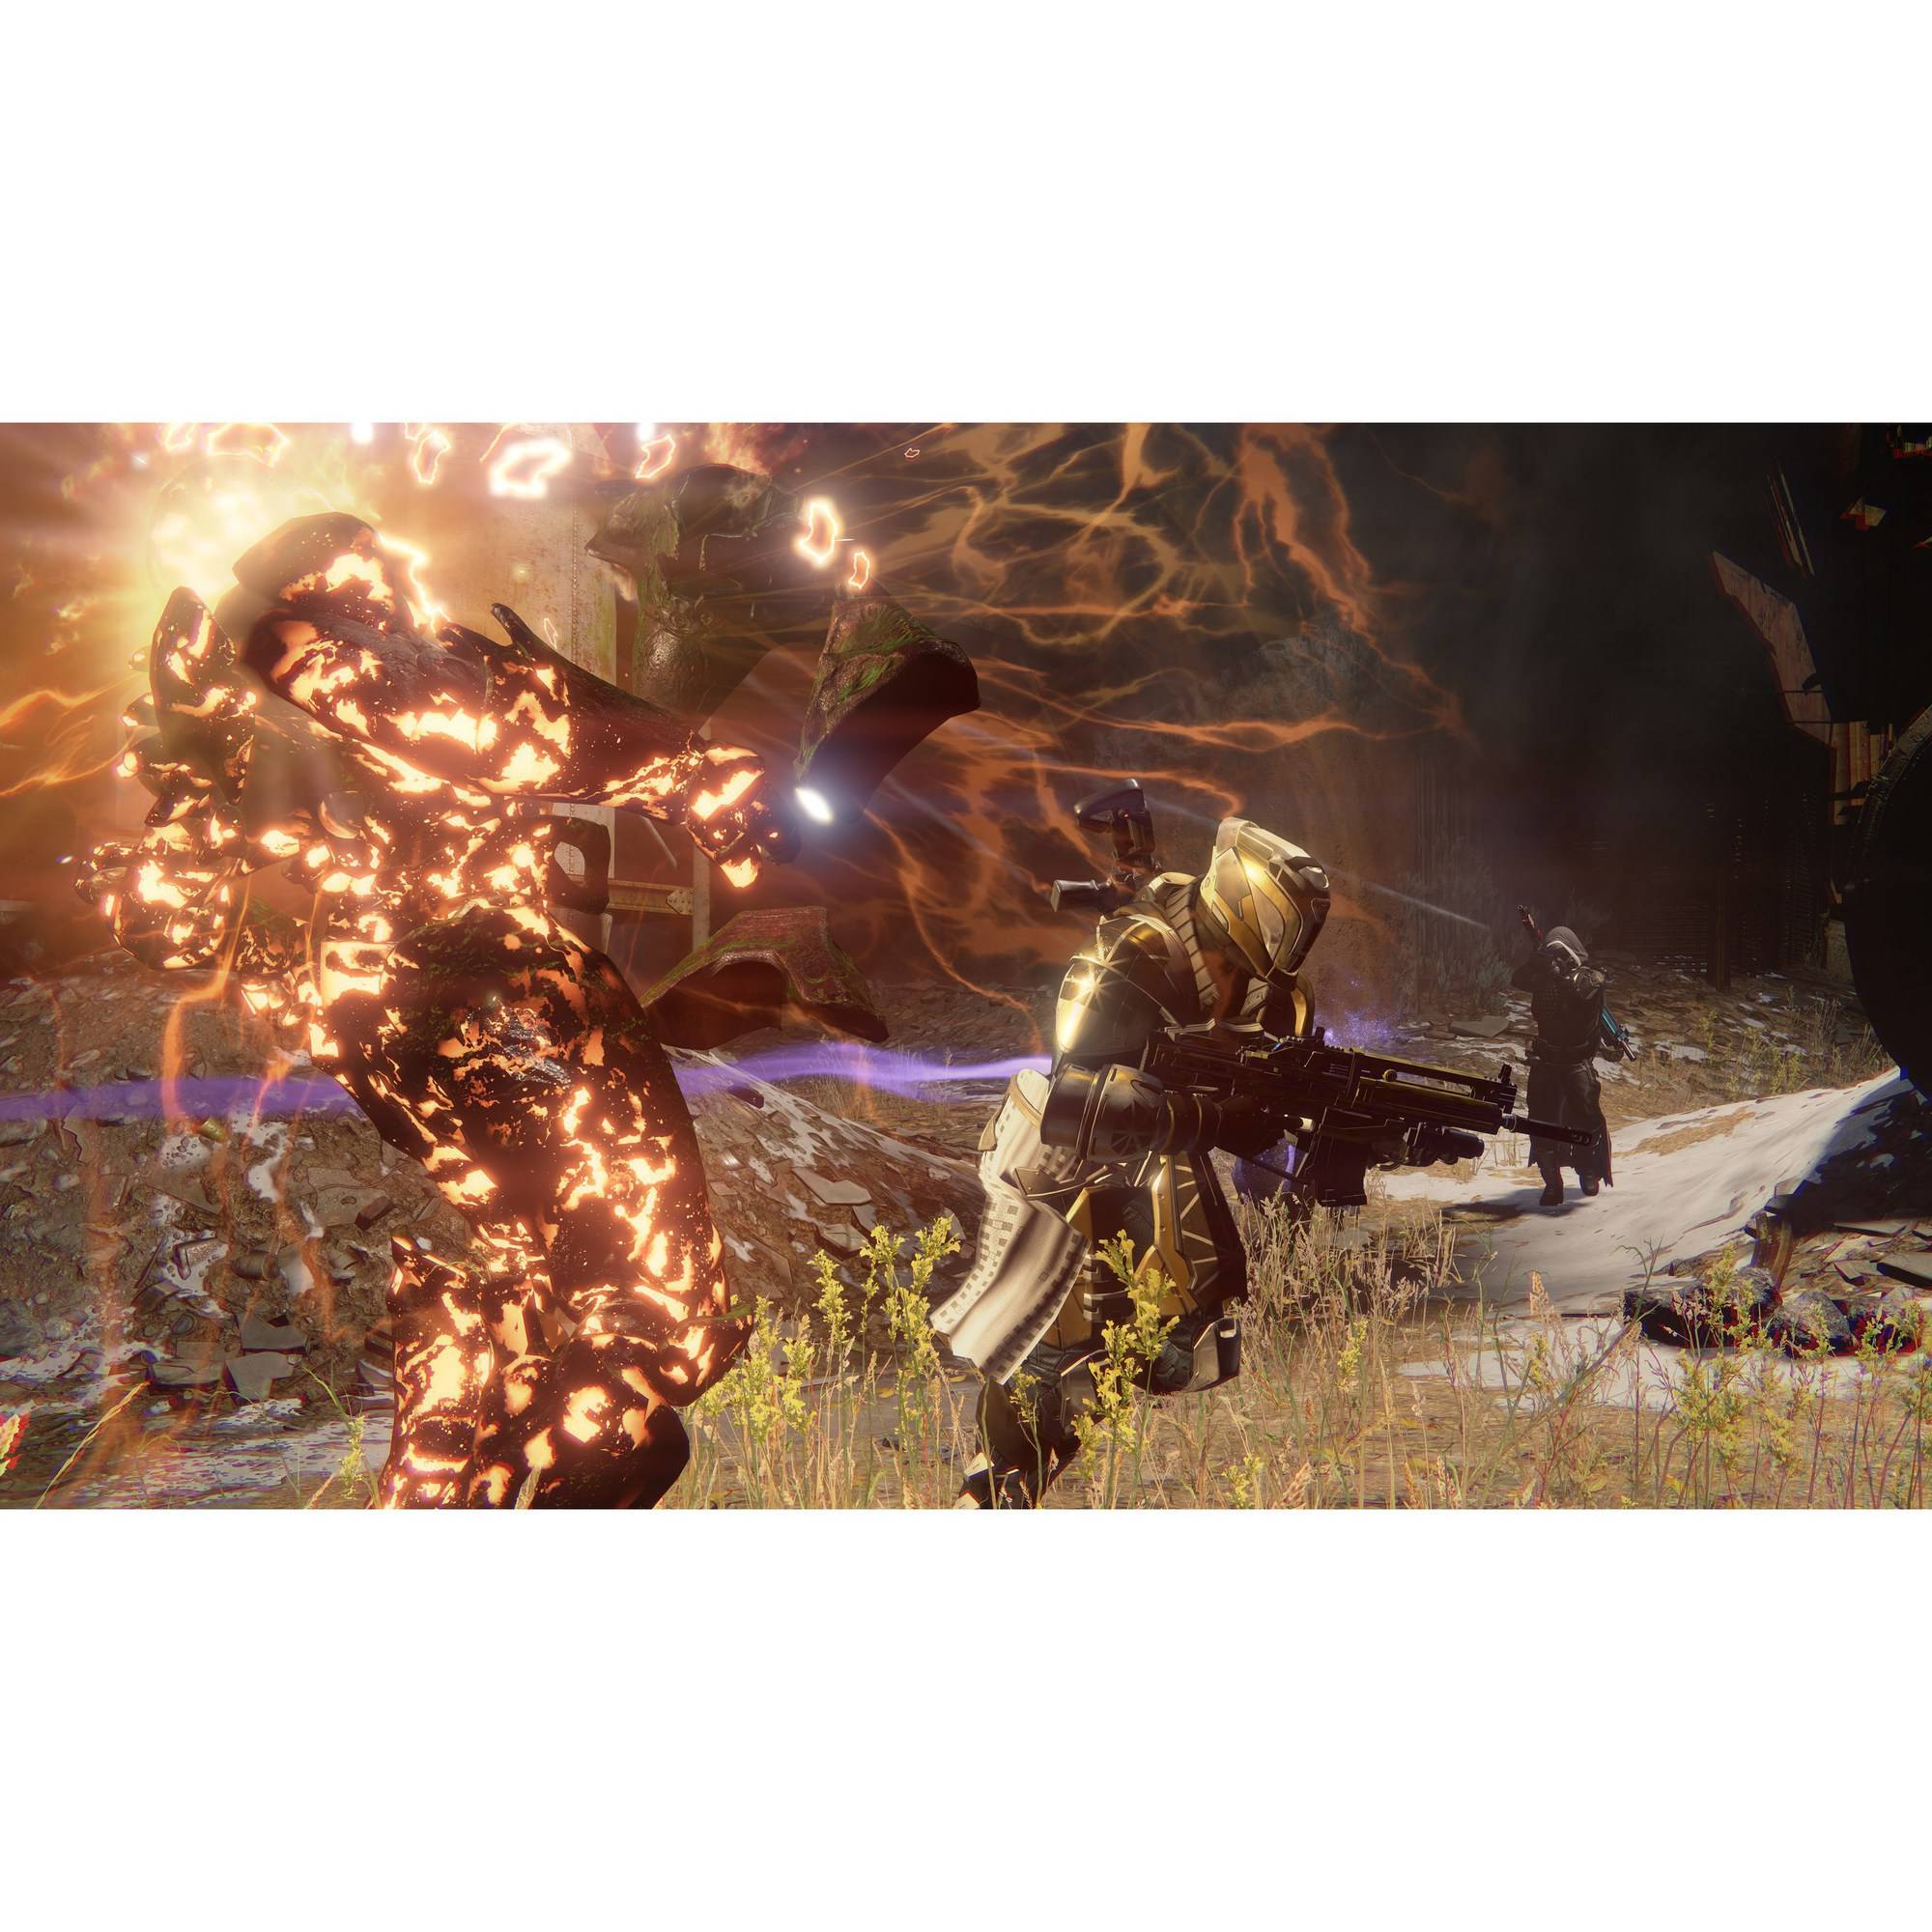 Destiny: The Taken King Legendary Edition, Activision, PlayStation 4, 047875874428 - image 19 of 31